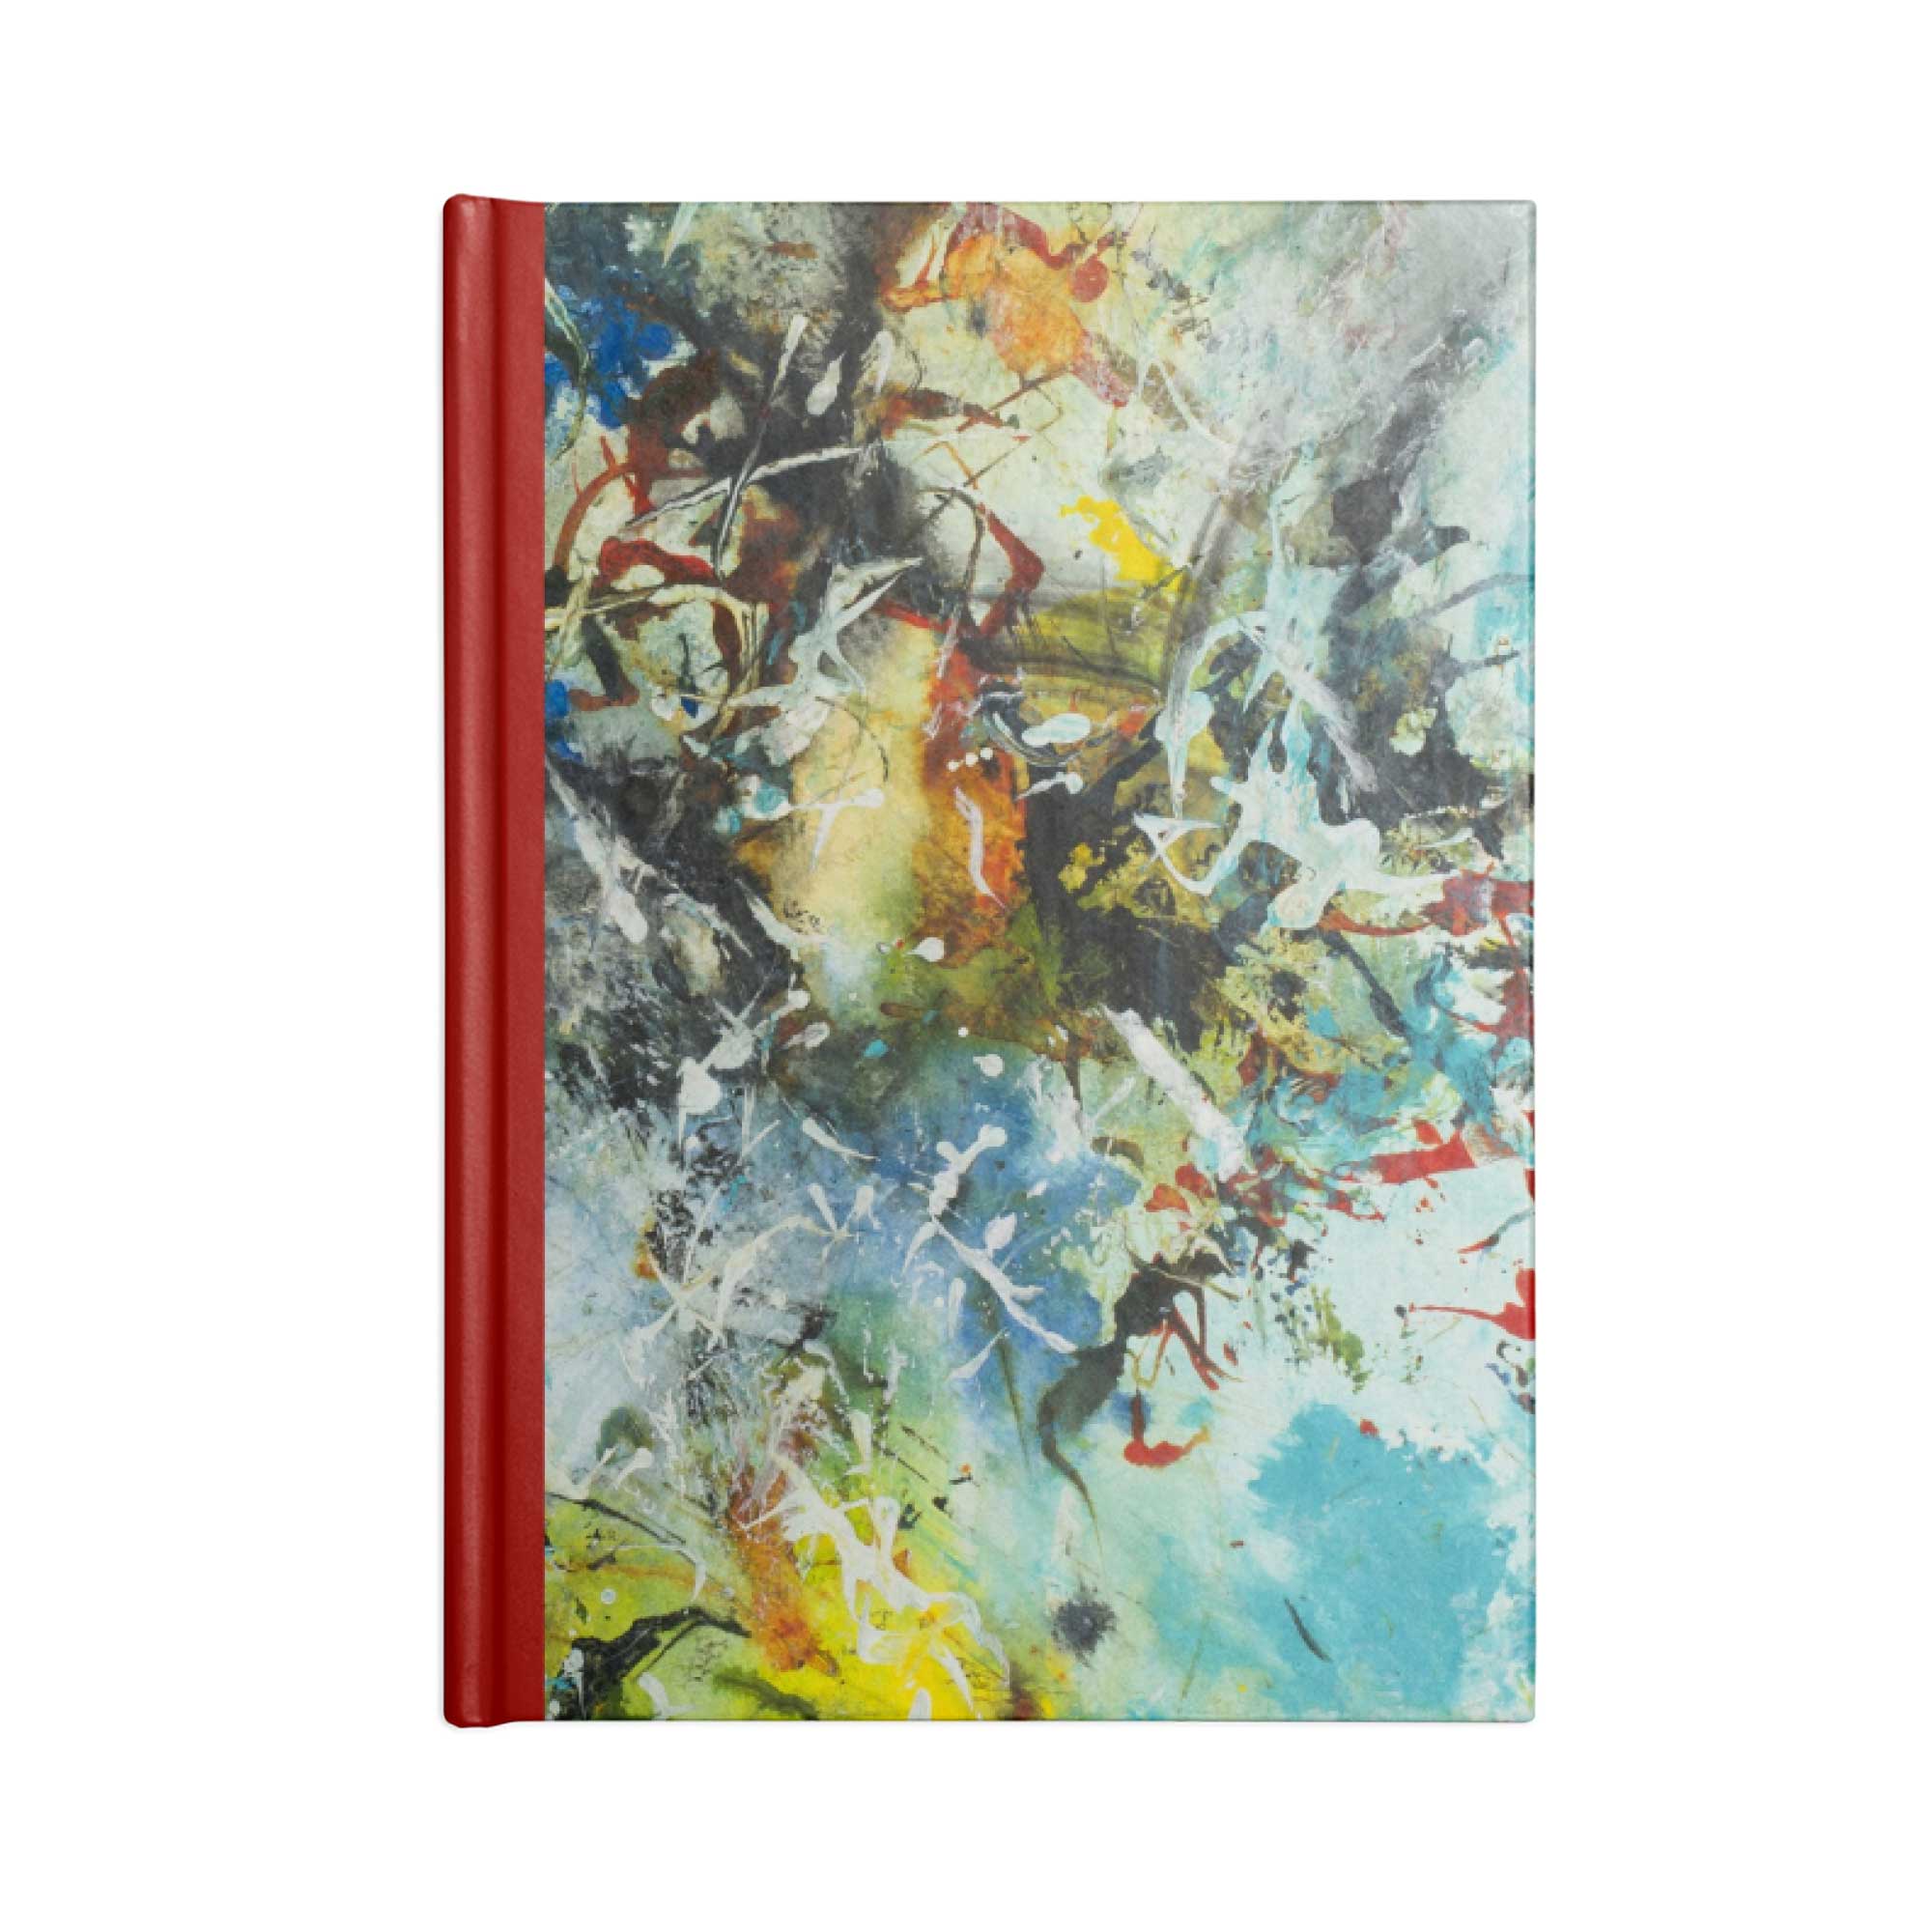 Clive Barker - Abstract-081 journal